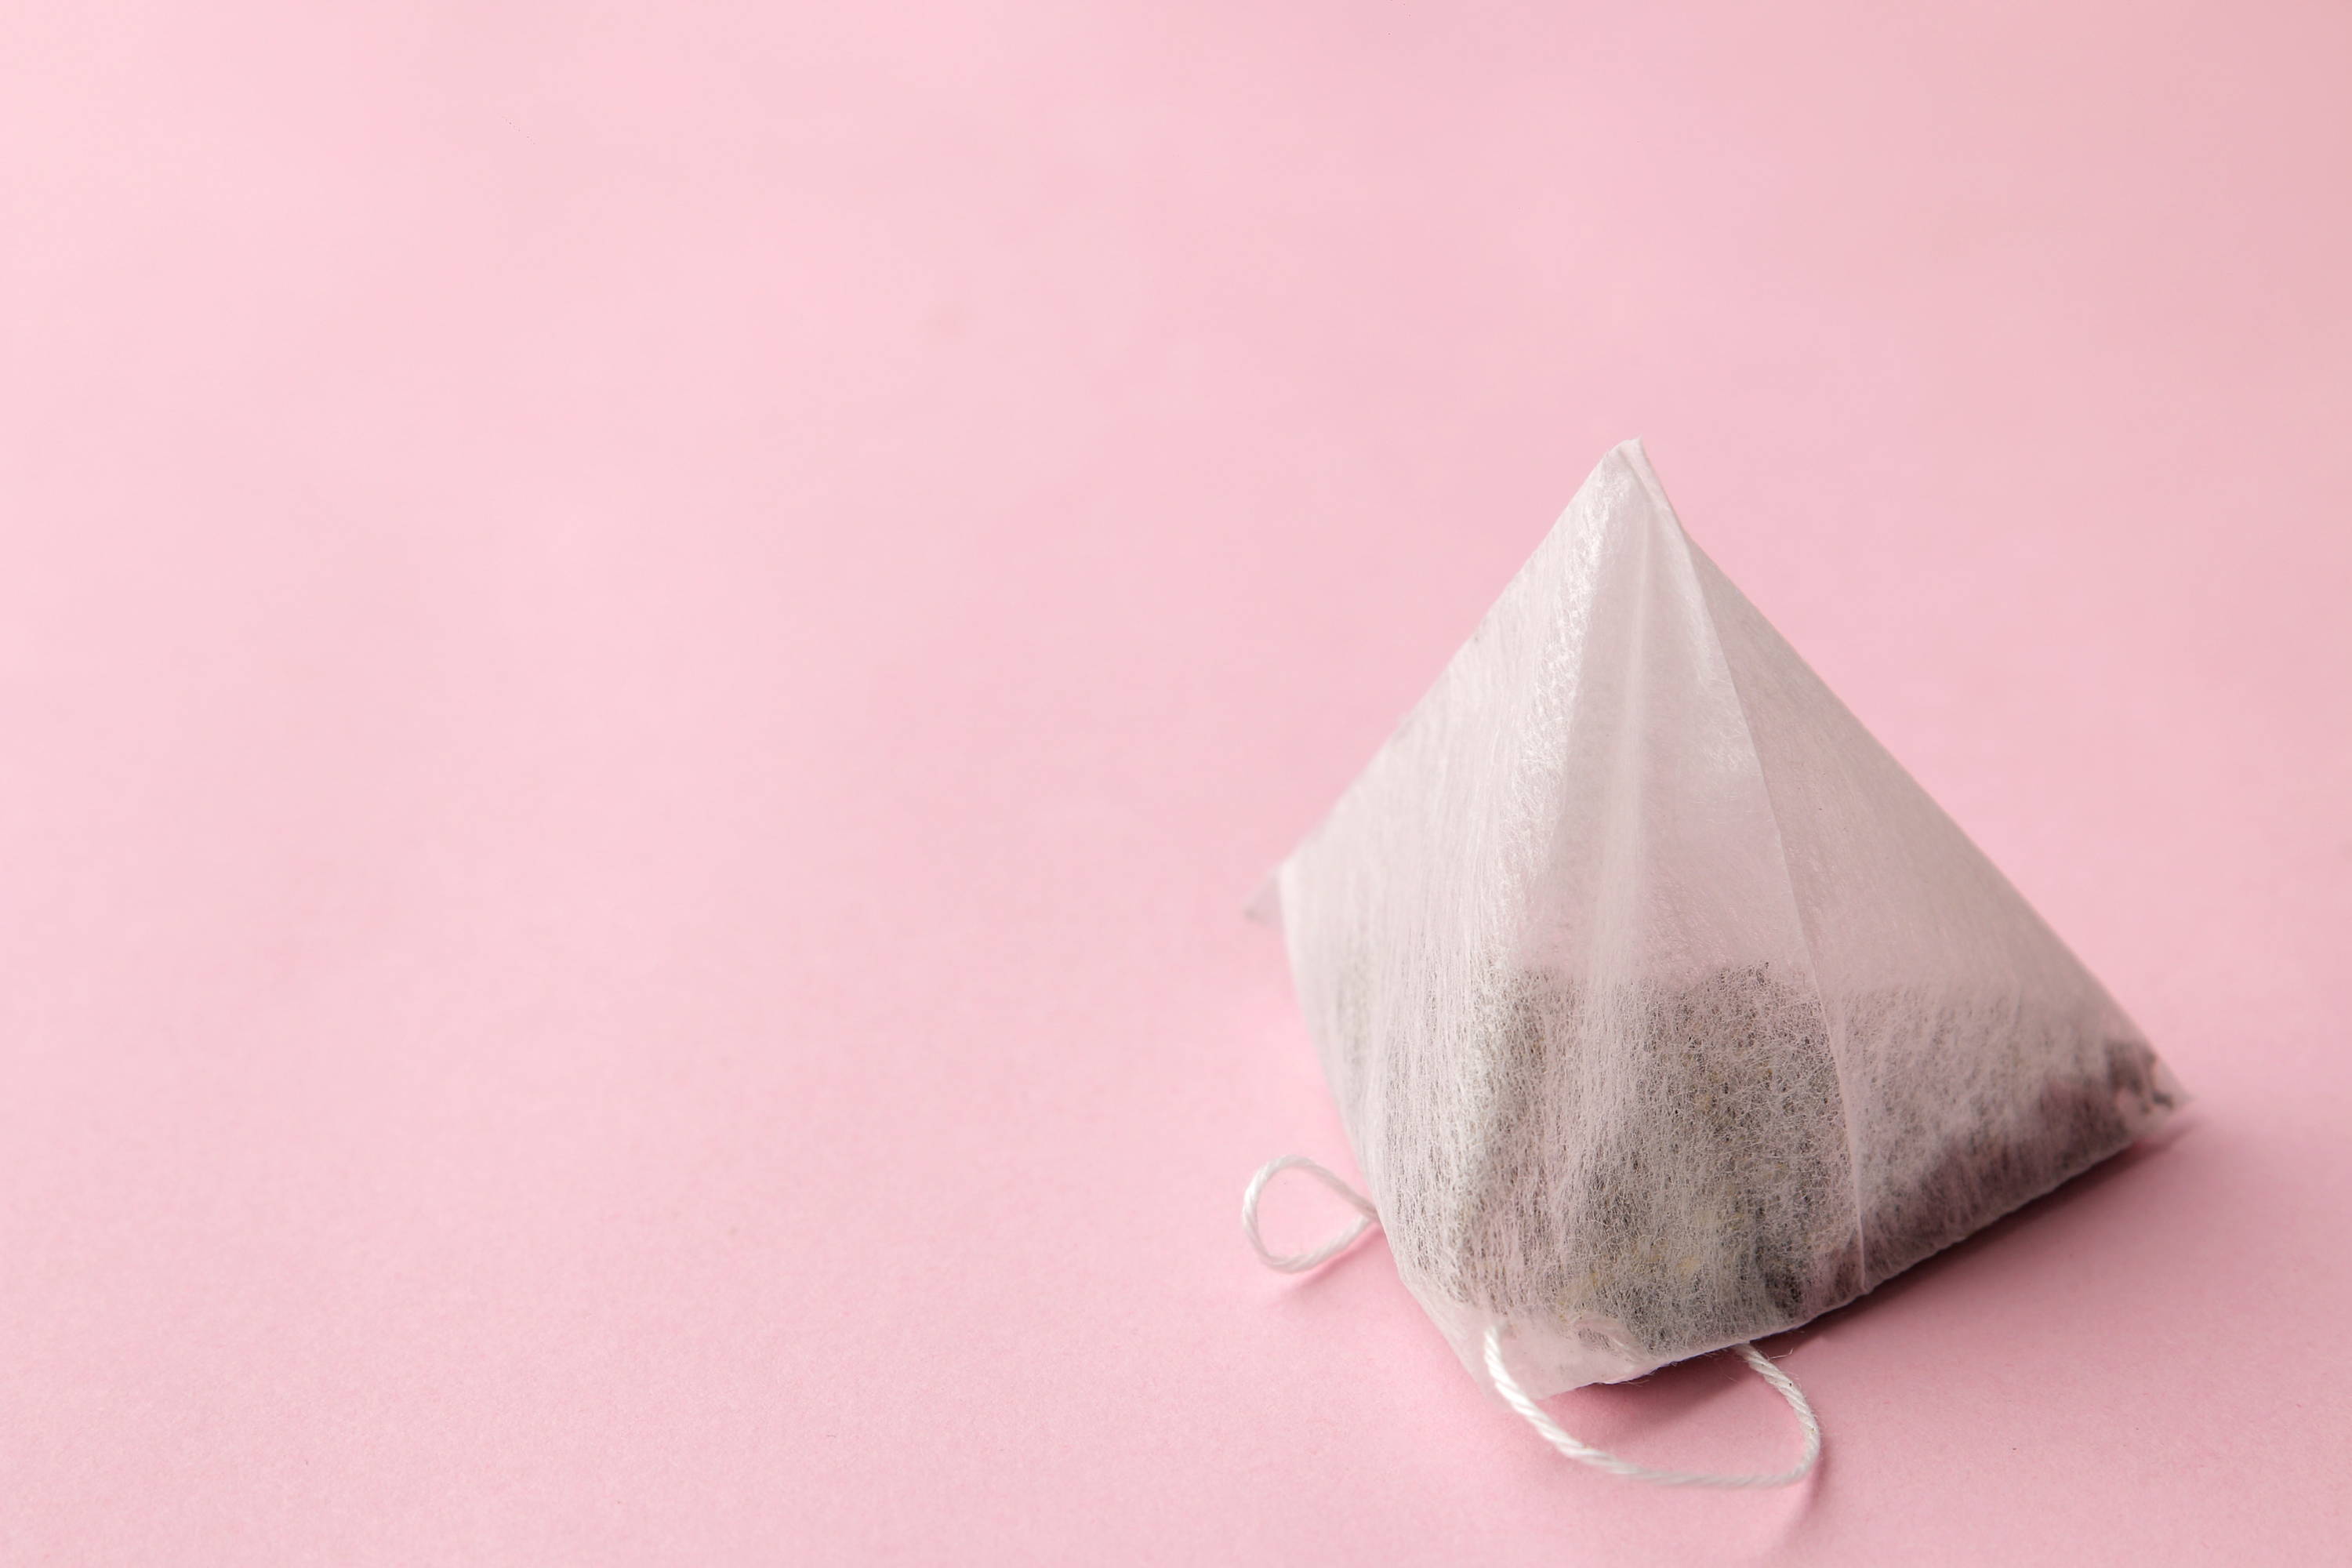 Tea bag on a plain background as a way to add flavour to plain water